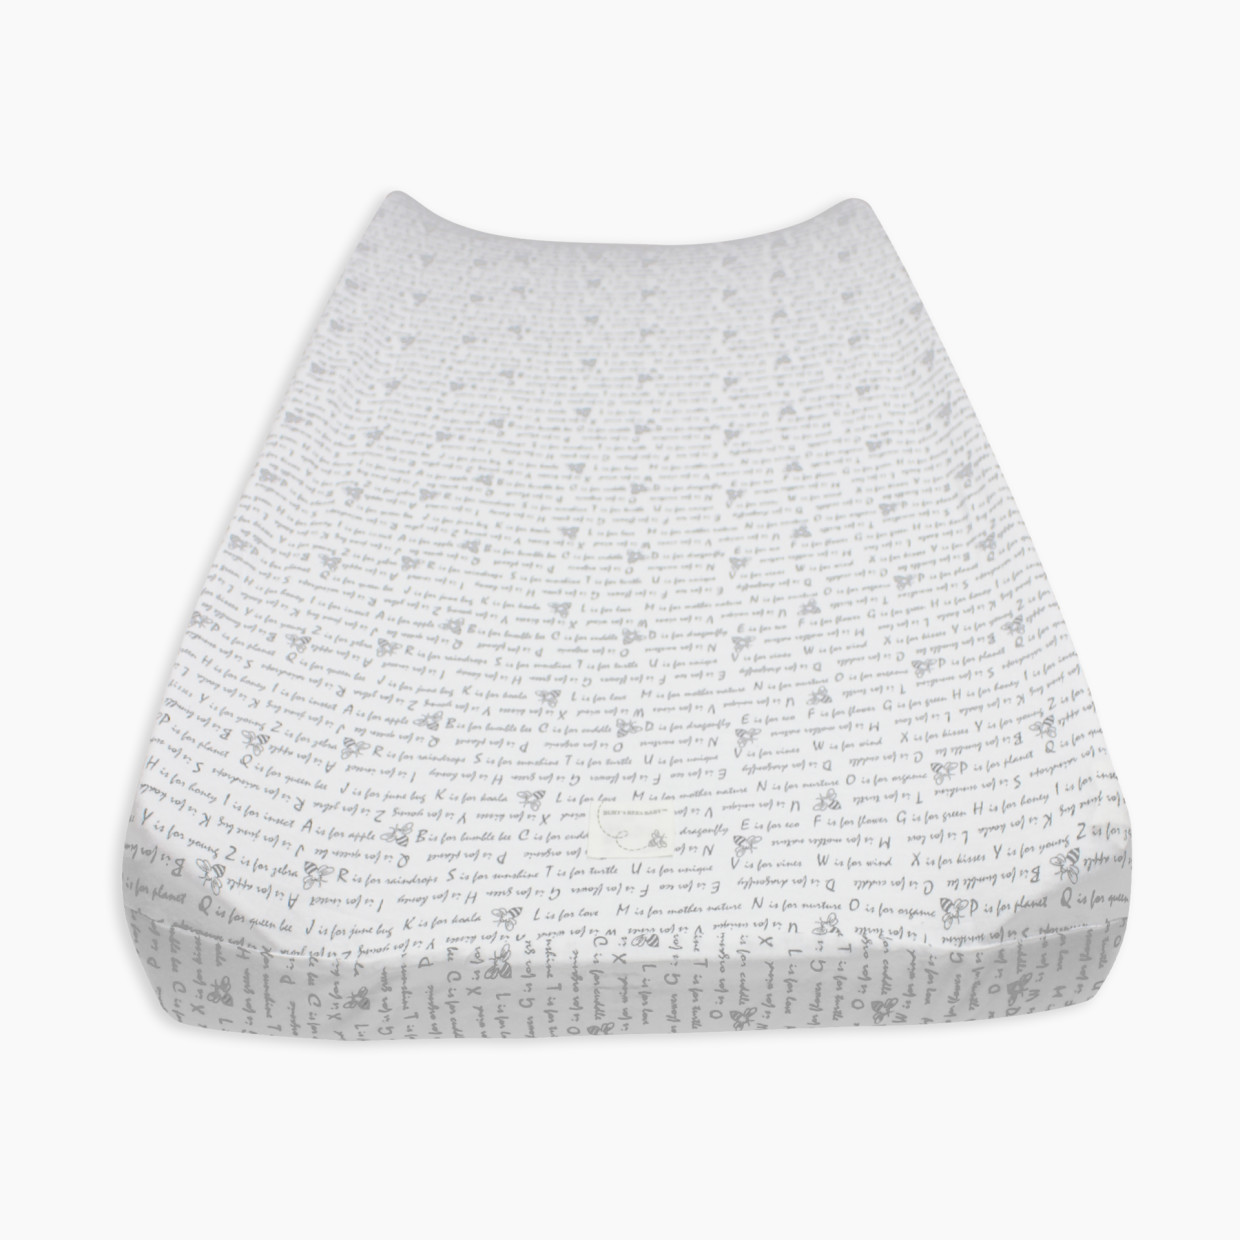 Burt's Bees Baby Organic Cotton Jersey Changing Pad Cover - Alphabet Bee.